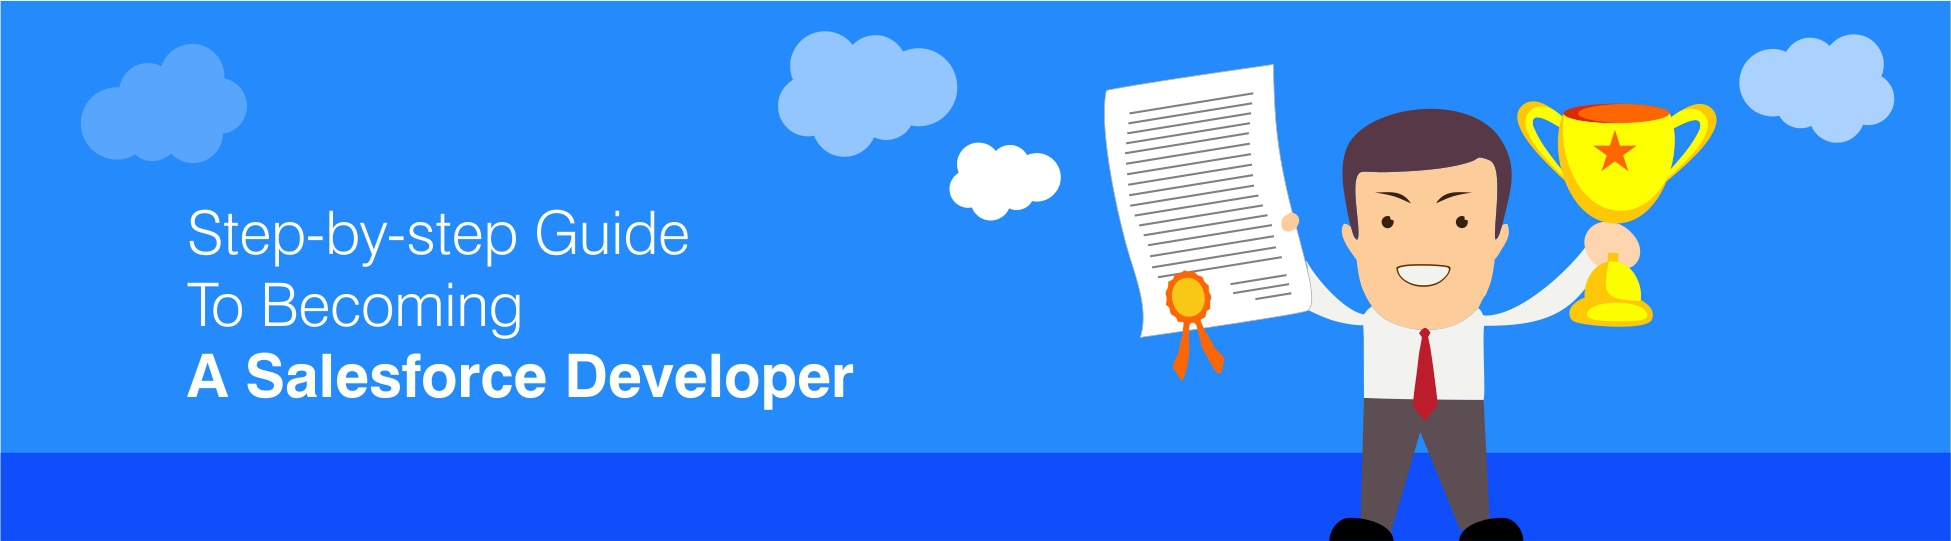 Step-by-step-guide-to-becoming-a-salesforce-developer (1)